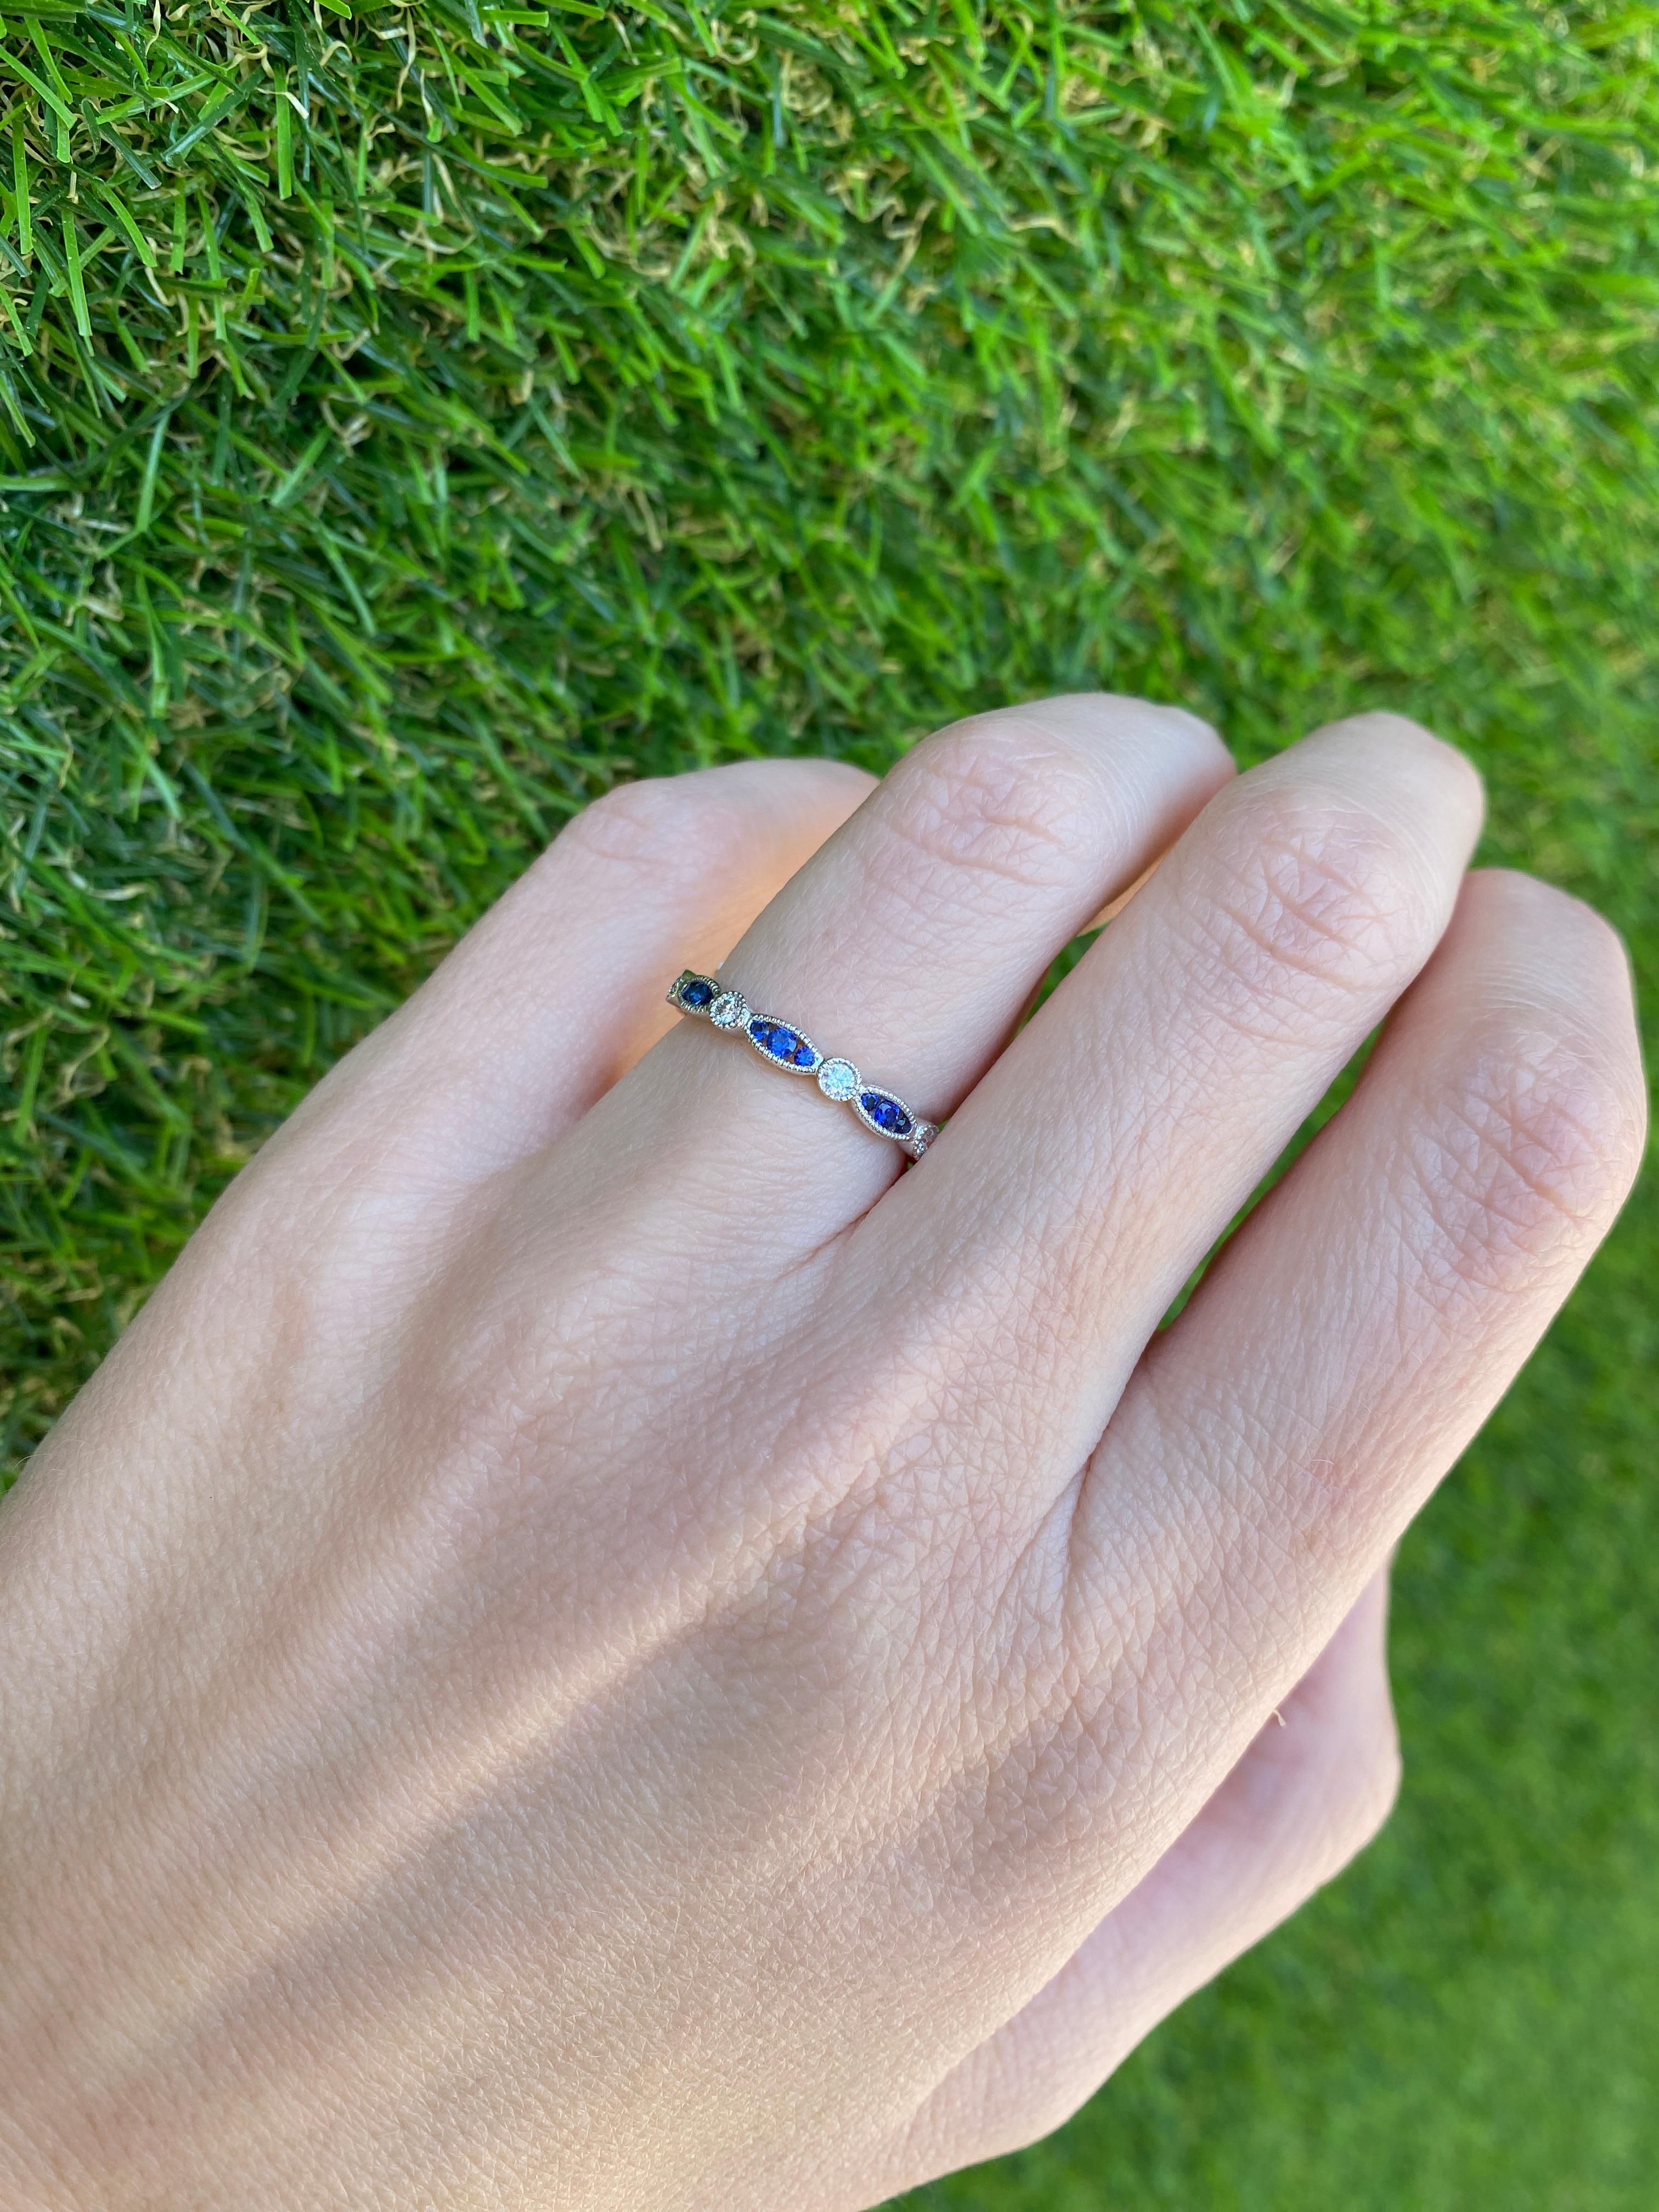 This is the perfect and unique stacking band! It features 0.37 carat total weight in round blue sapphires set in a marquis like shape alternating with 0.17 carat total weight in round diamonds. It is set in 18 karat white gold with milgrain